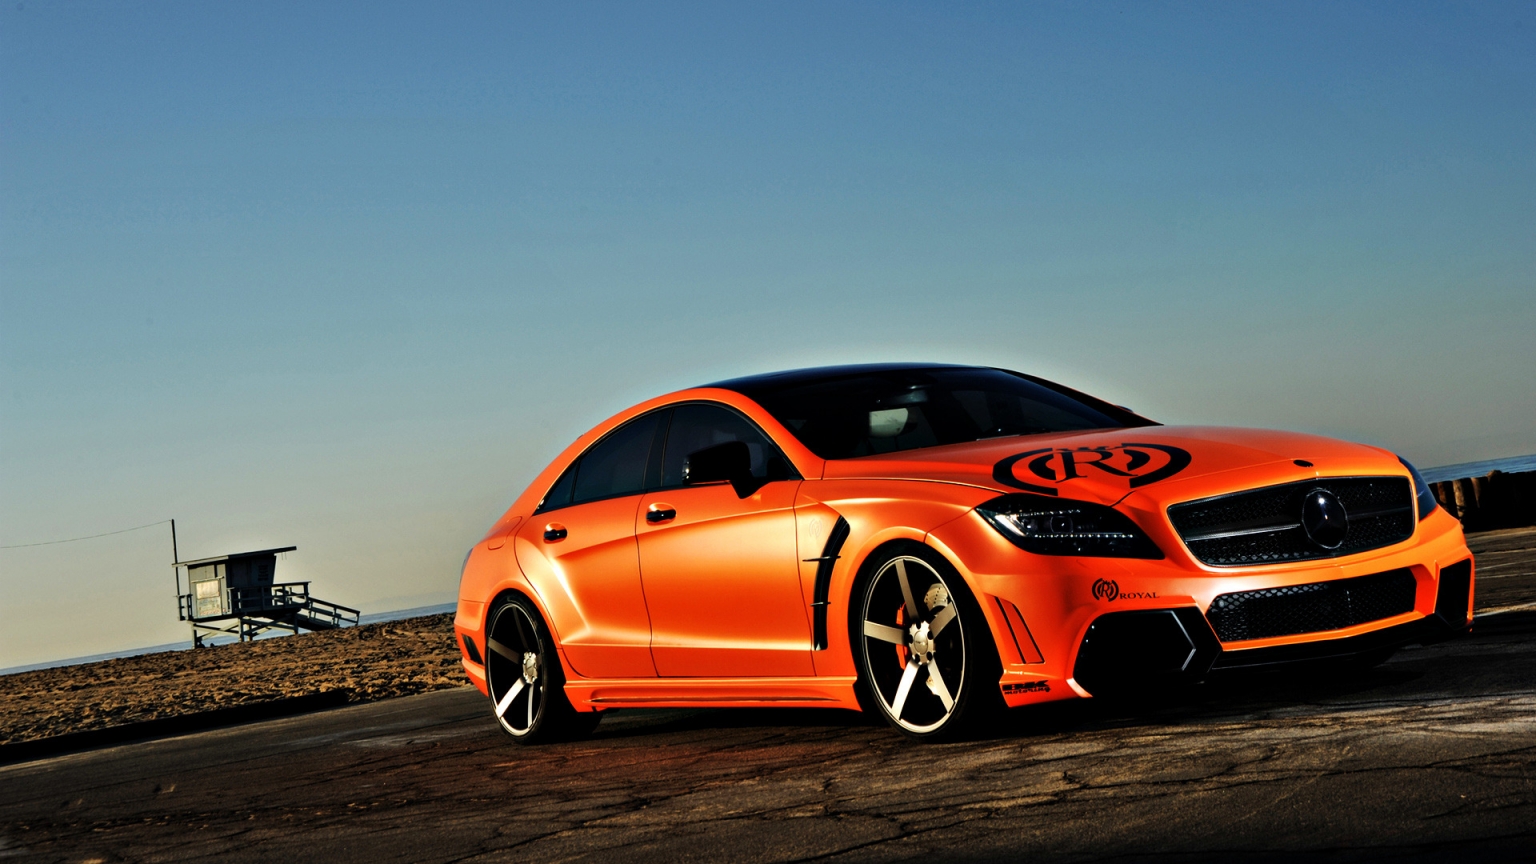 Mercedes CLS 63 AMG Tuning for 1536 x 864 HDTV resolution